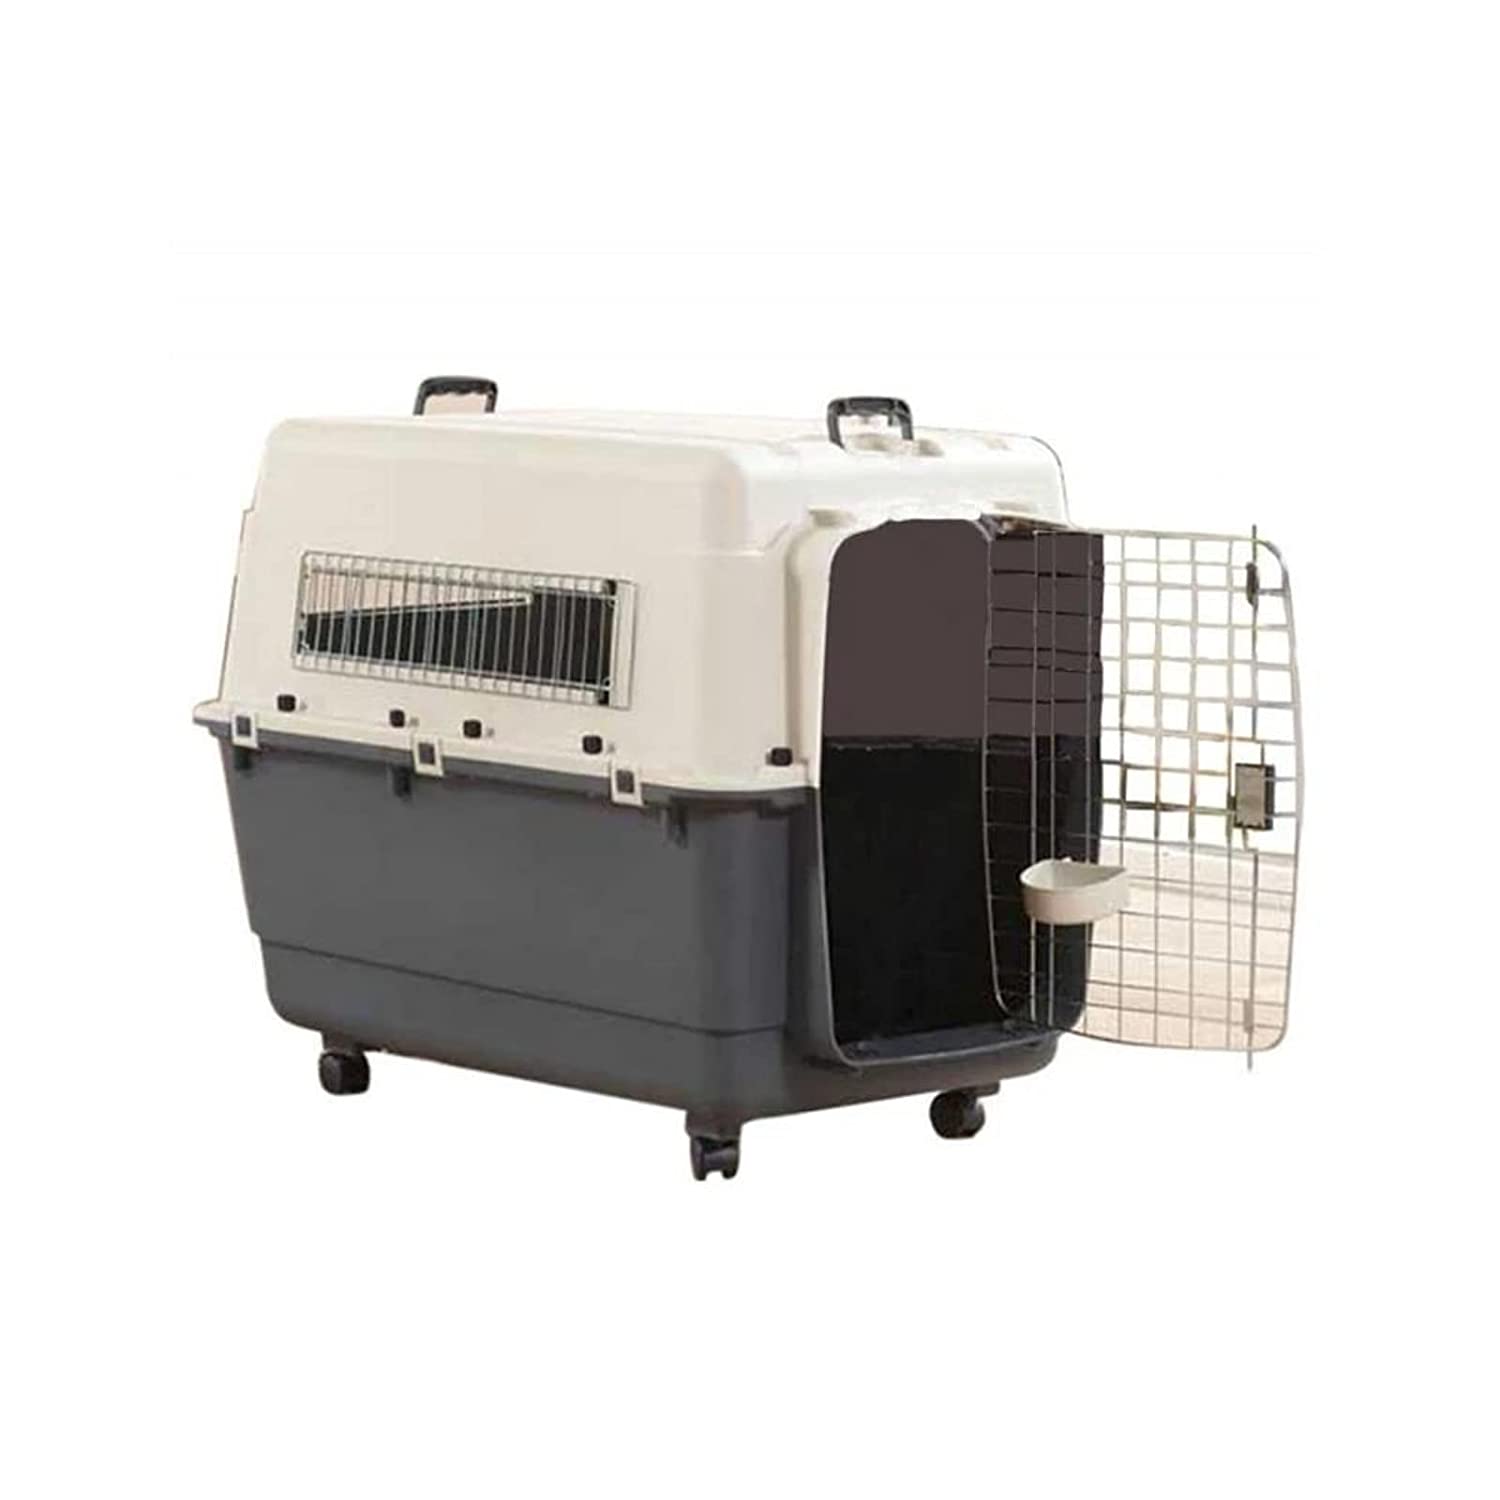 Savic Andes Pet Carrier Andes 6 - 36 x 24 x 27 inch - 35 kg